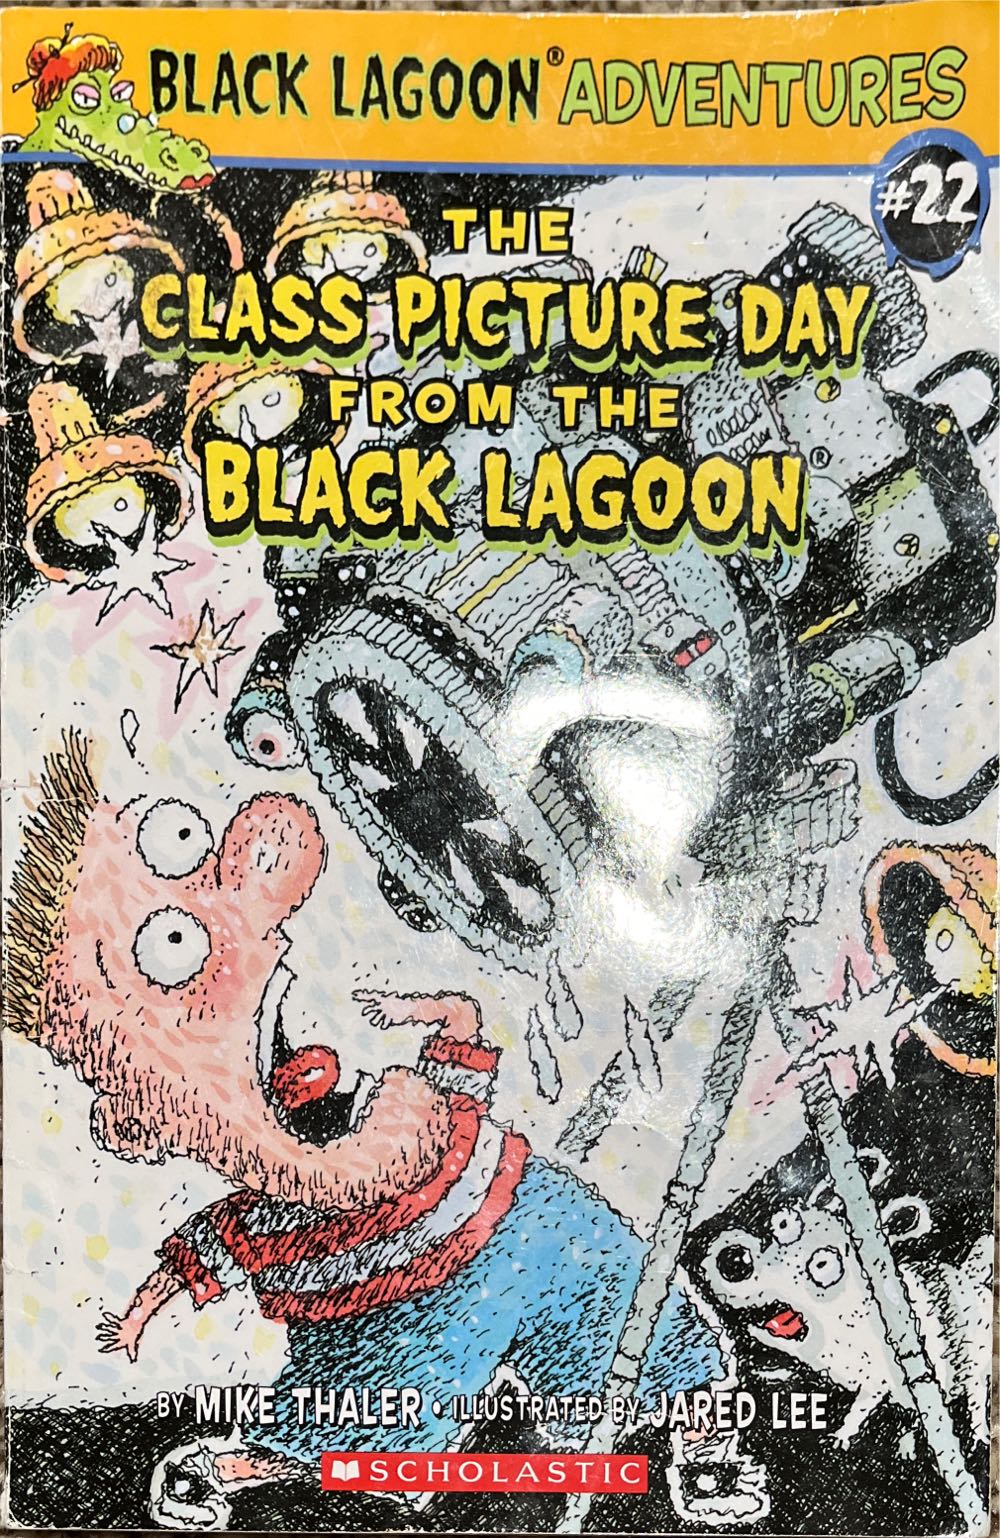 Black Lagoon #22: The Class Picture Day From the Black Lagoon - Mike Thaler (Scholastic Inc. - Paperback) book collectible [Barcode 9780545476669] - Main Image 2